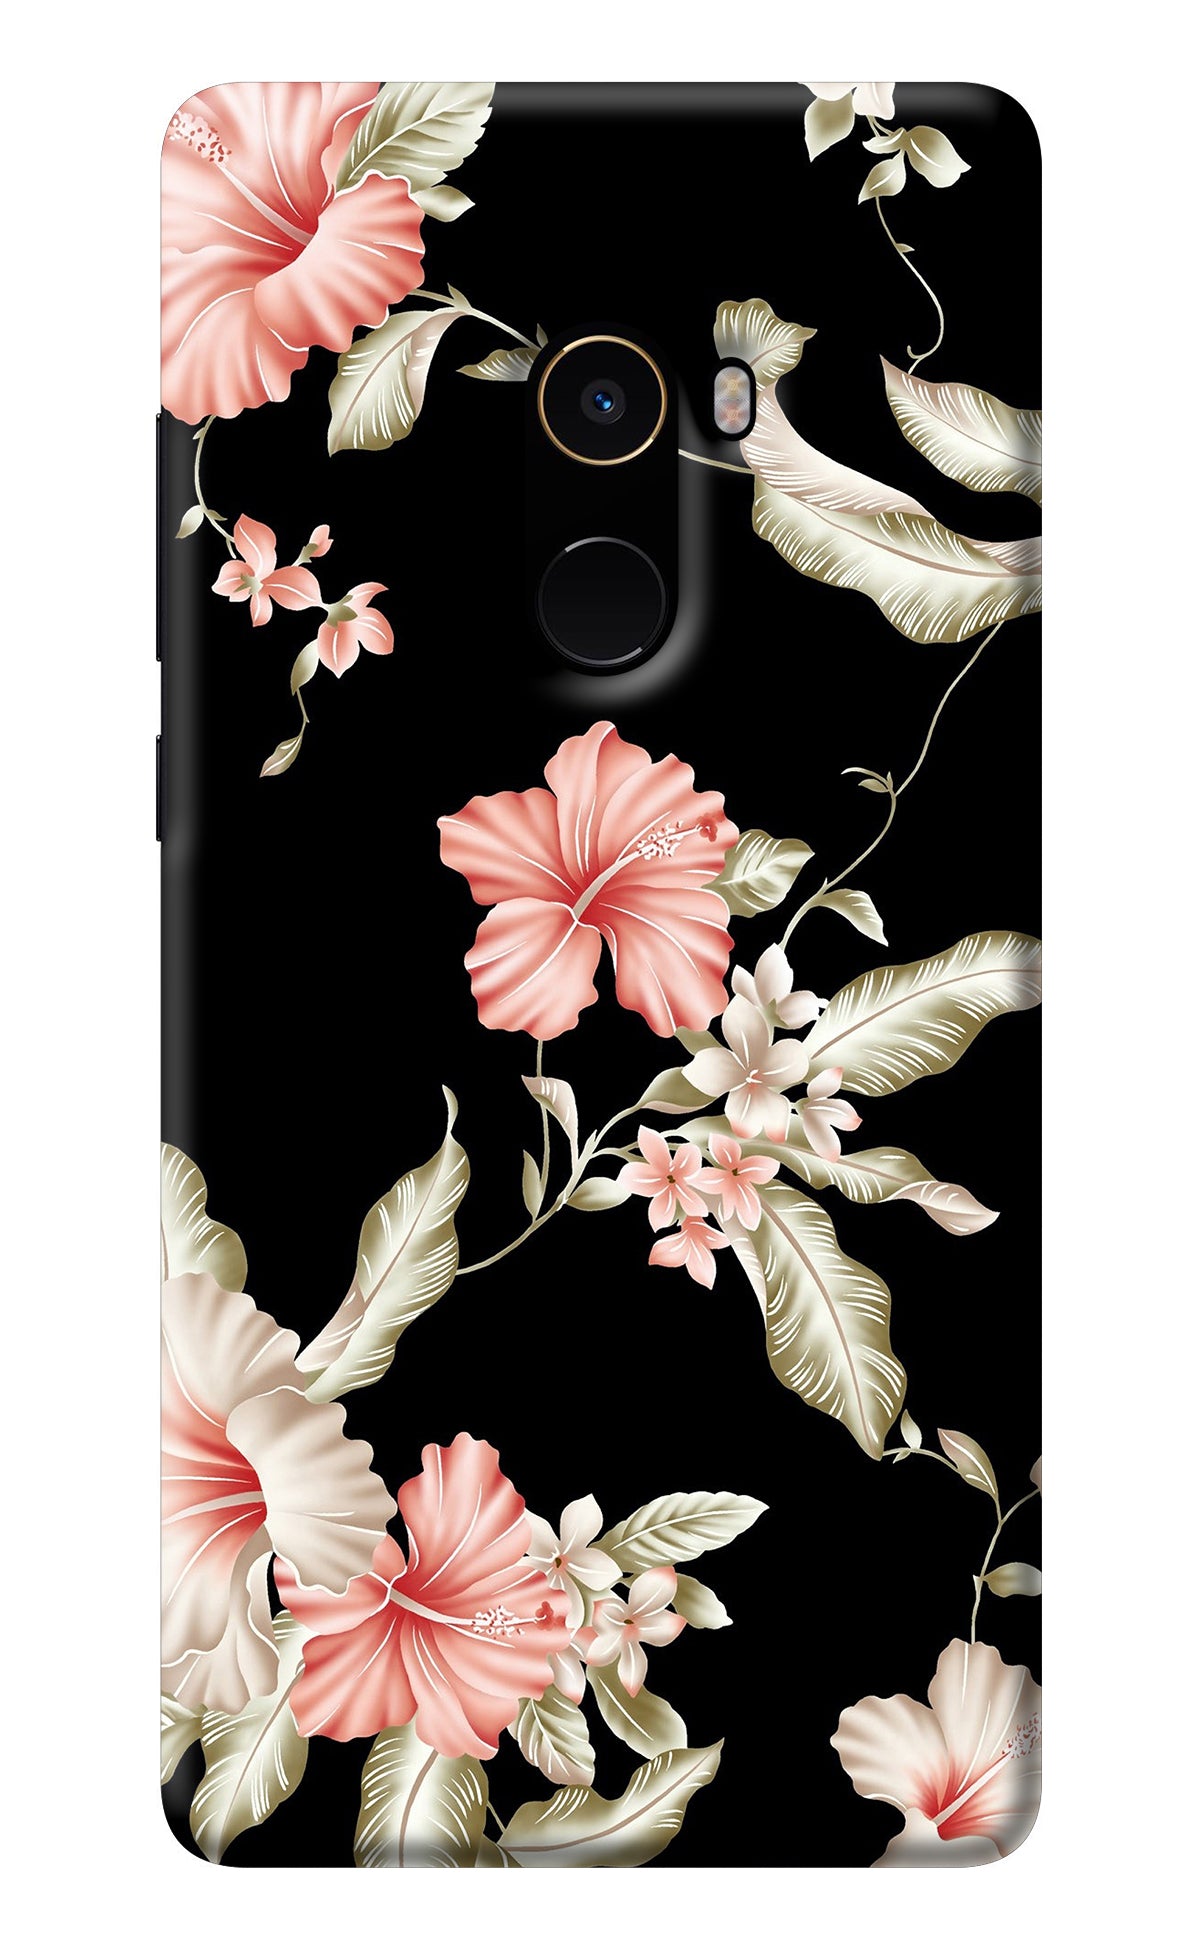 Flowers Mi Mix 2 Back Cover